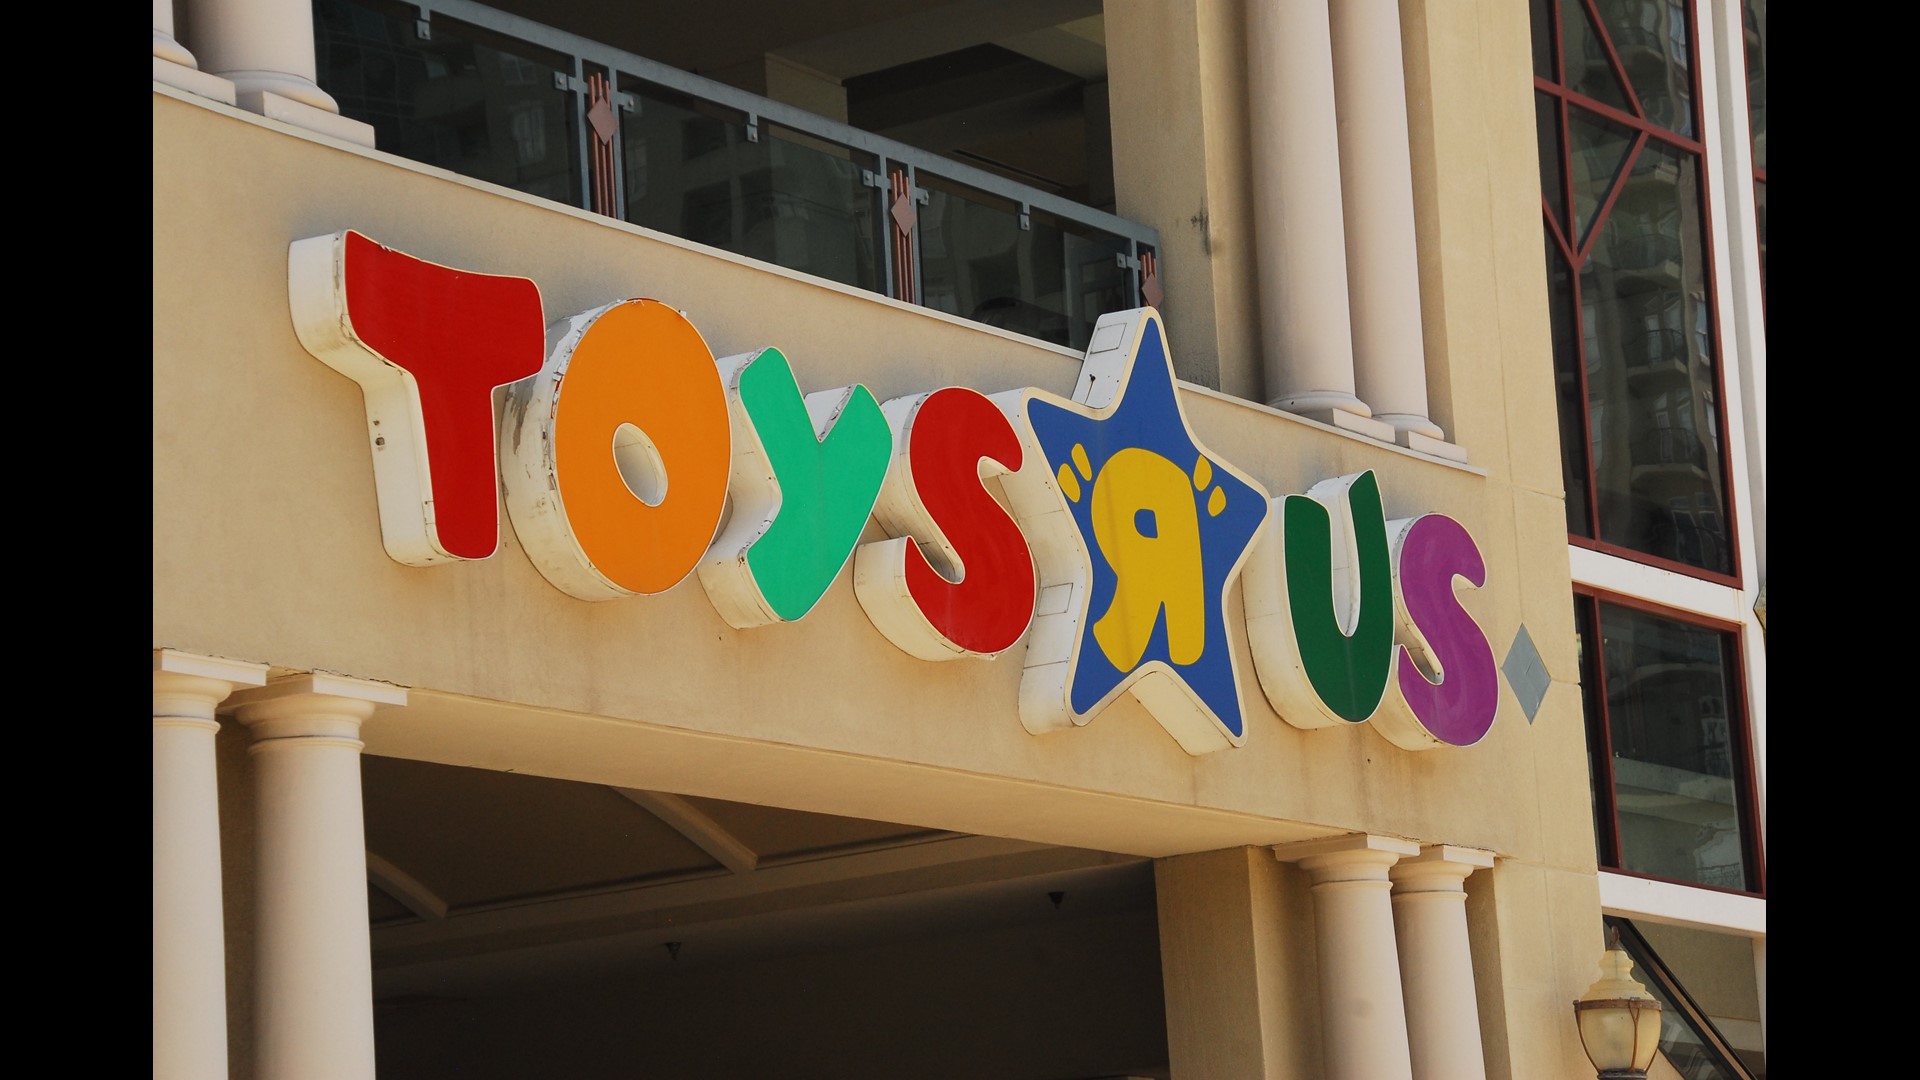 5 things you need to know about Toys R Us closing